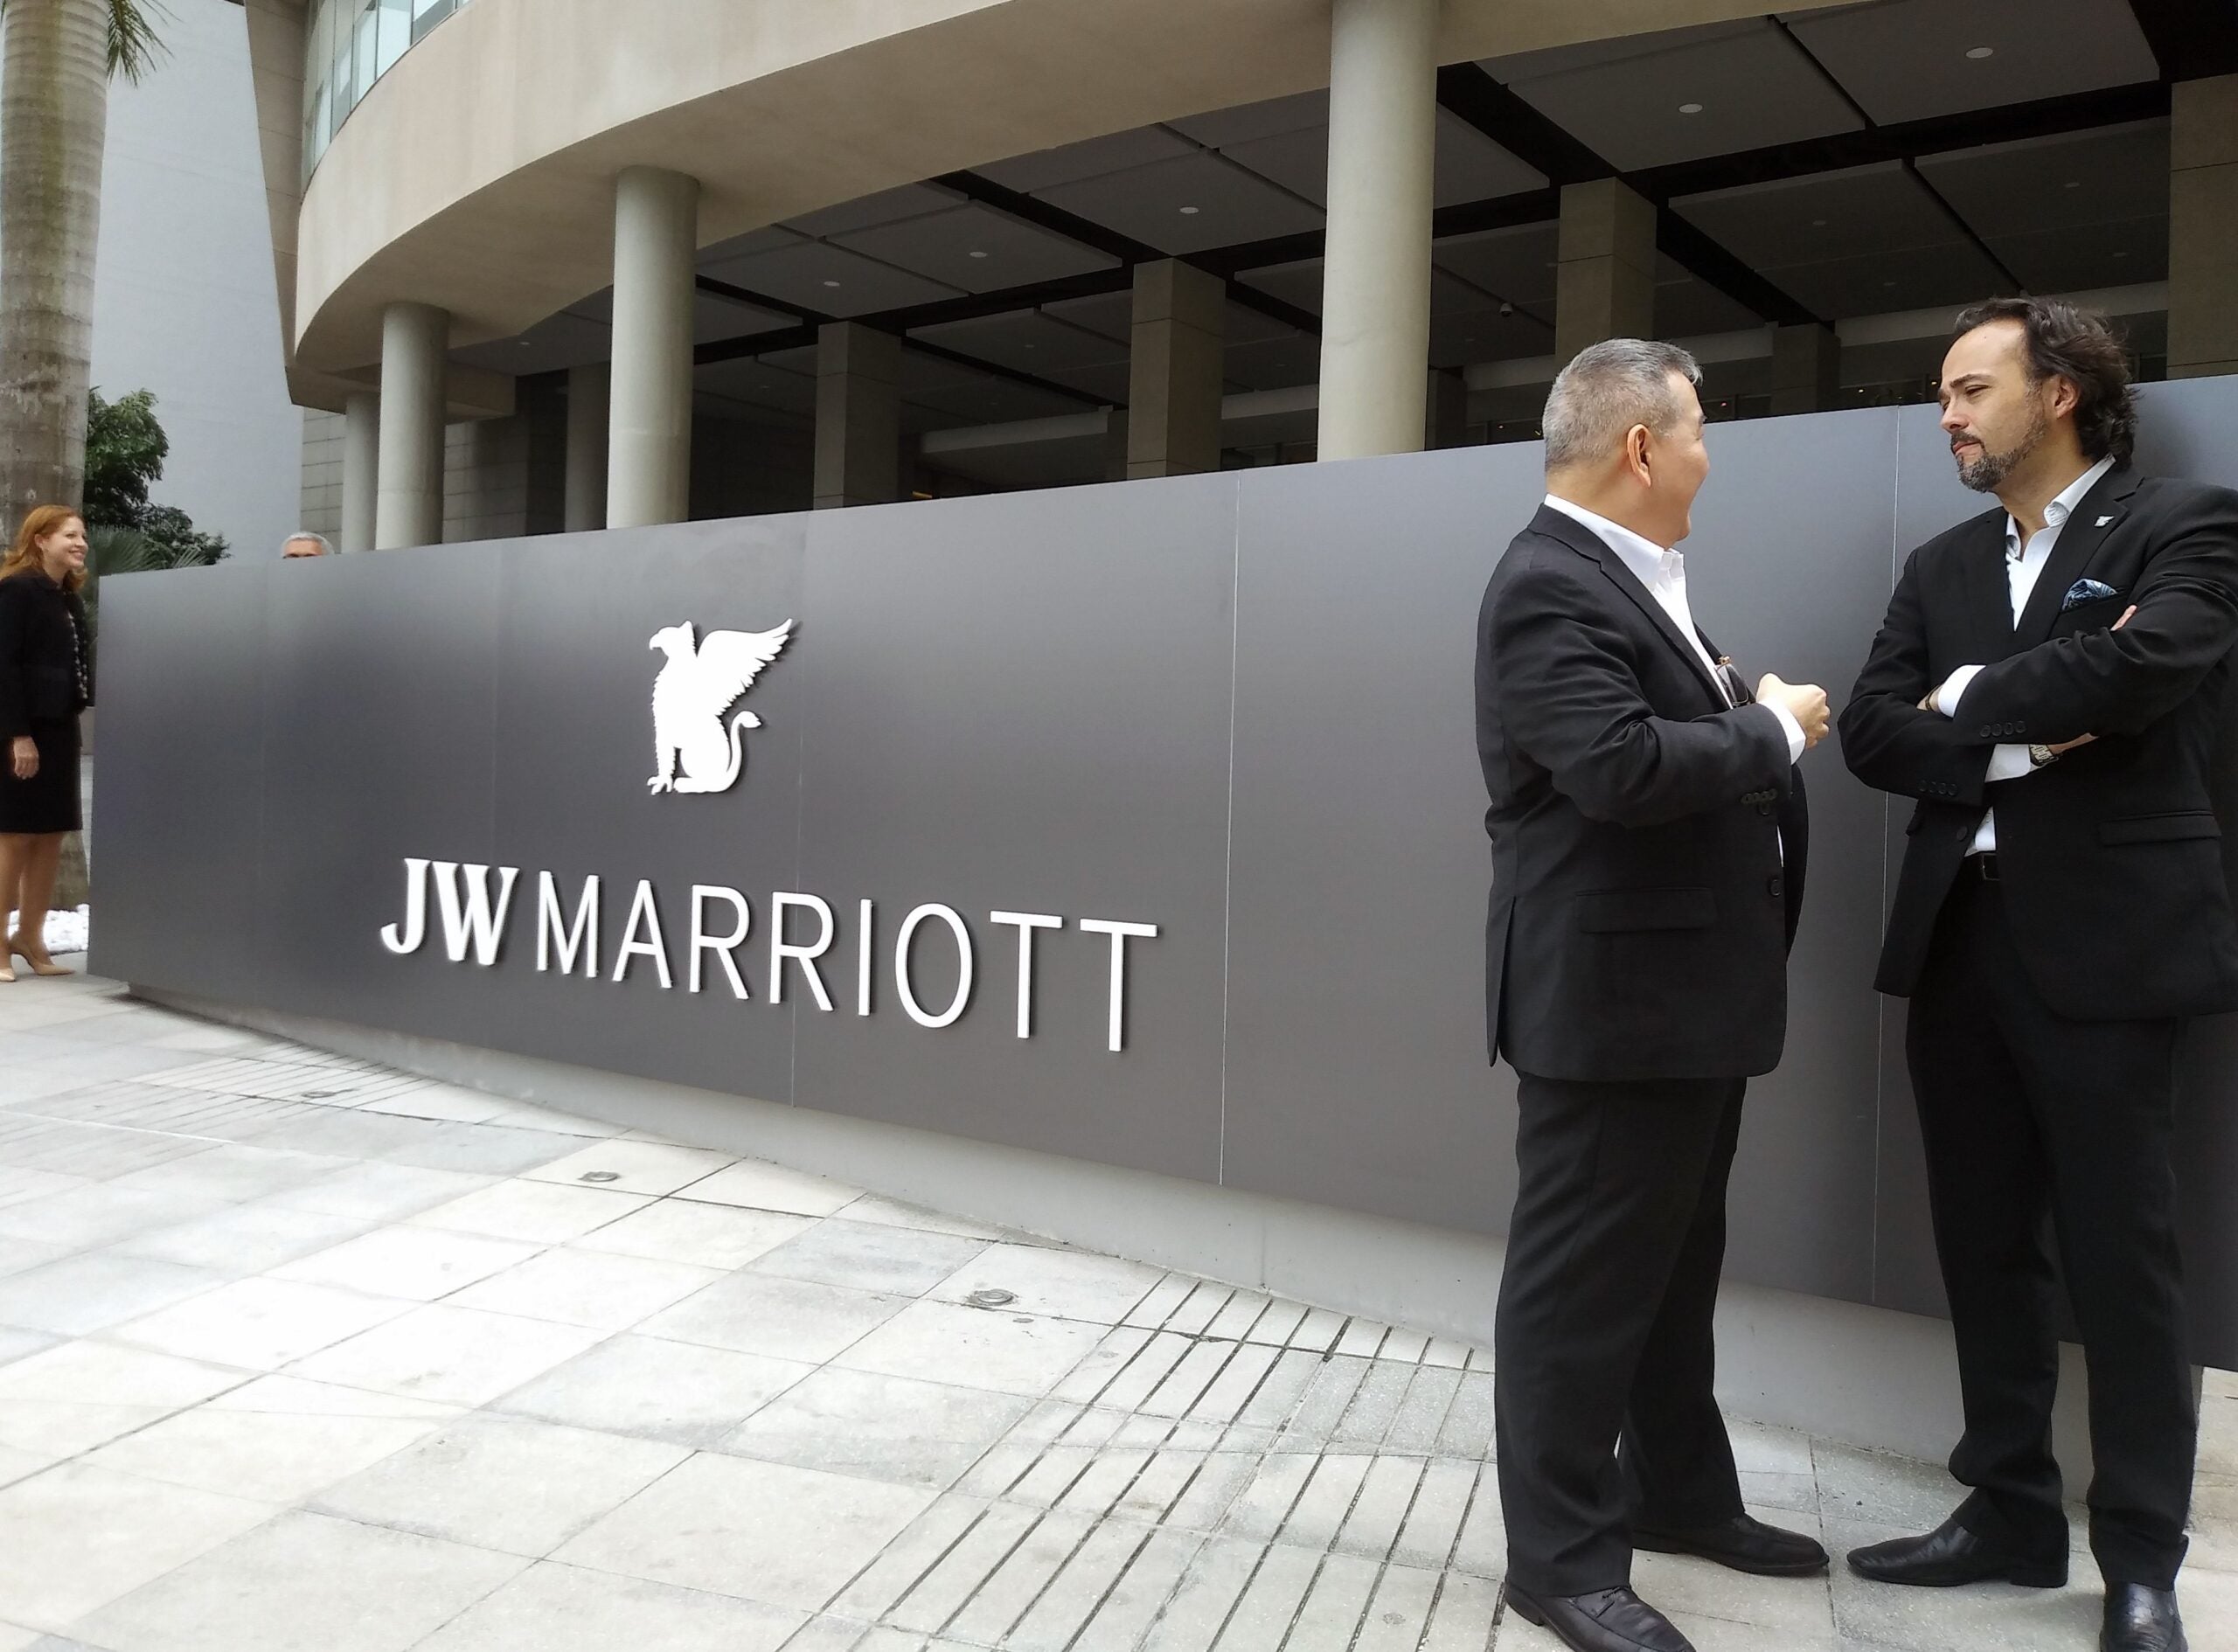 View of the newly inaugurated Marriott Hotel sign, after the US hotel chain took over the ex Trump tower in Panama City mired for months in a legal spat with the Trump Organization, on September 25, 2018. - Until recently, the Trump Ocean Club International Hotel was located in the building, managed by the Trump Organization. But last year, the hotel and most of the apartments in the tower were bought by Miami-based Cypriot businessman Orestes Fintiklis, who in March evicted the Trump Organization before its management contract had ended blaming the Trump name for a drop in business, and removed the president's name from the front of the luxury 72-floor high rise, triggering a flurry of retaliatory legal action. (Photo by Juan José Rodríguez / AFP) (Photo credit should read JUAN JOSE RODRIGUEZ/AFP via Getty Images)